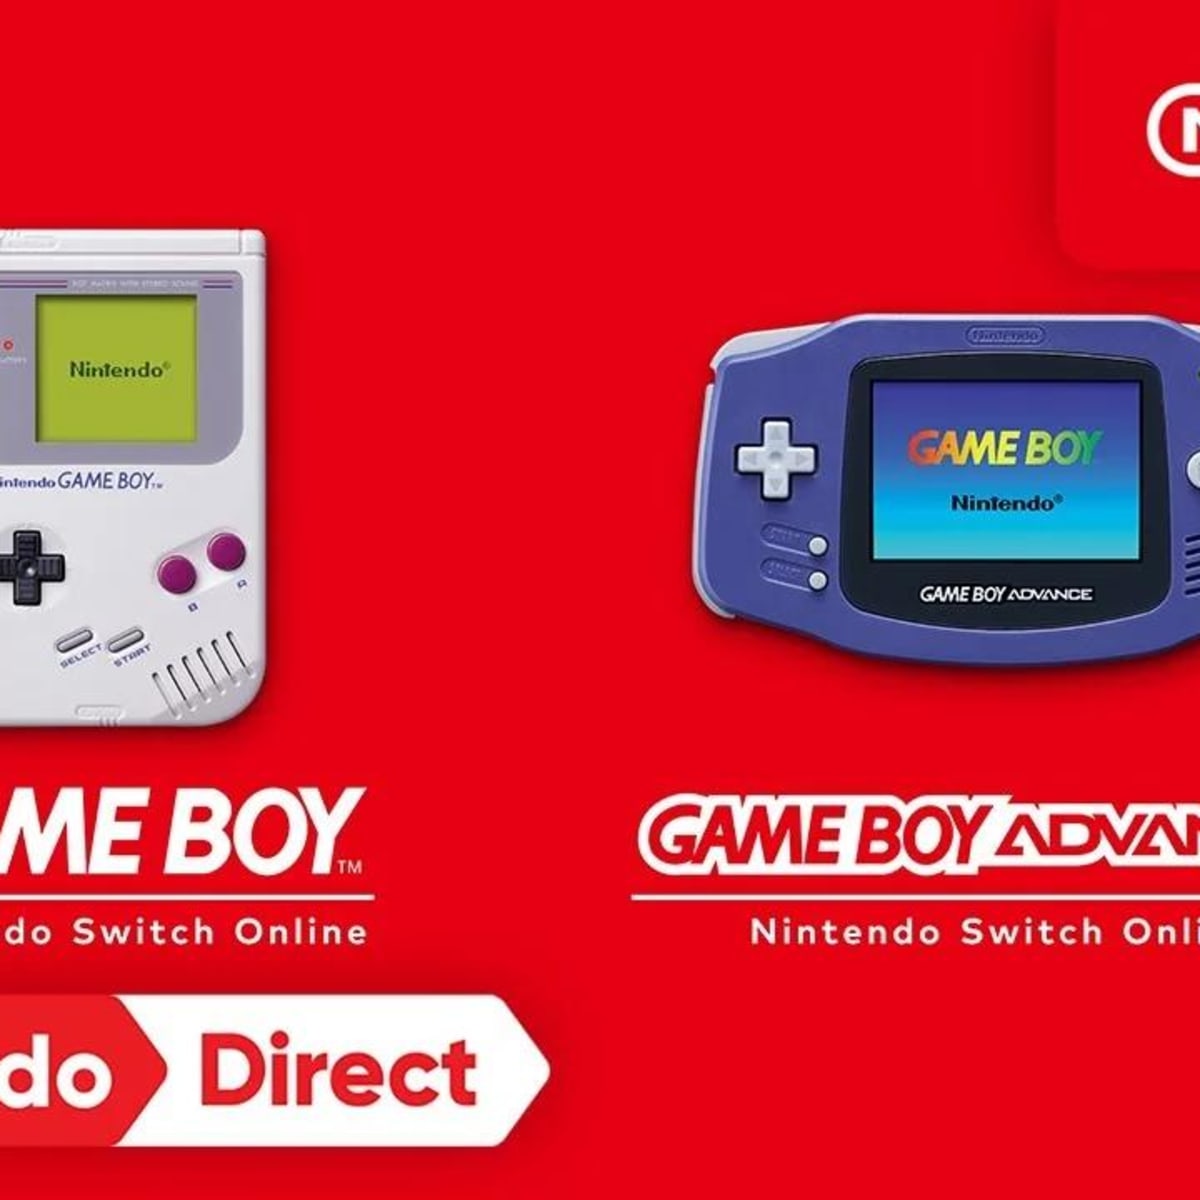 Game Boy And Game Boy Advance Games Are On Nintendo Switch Online Right Now